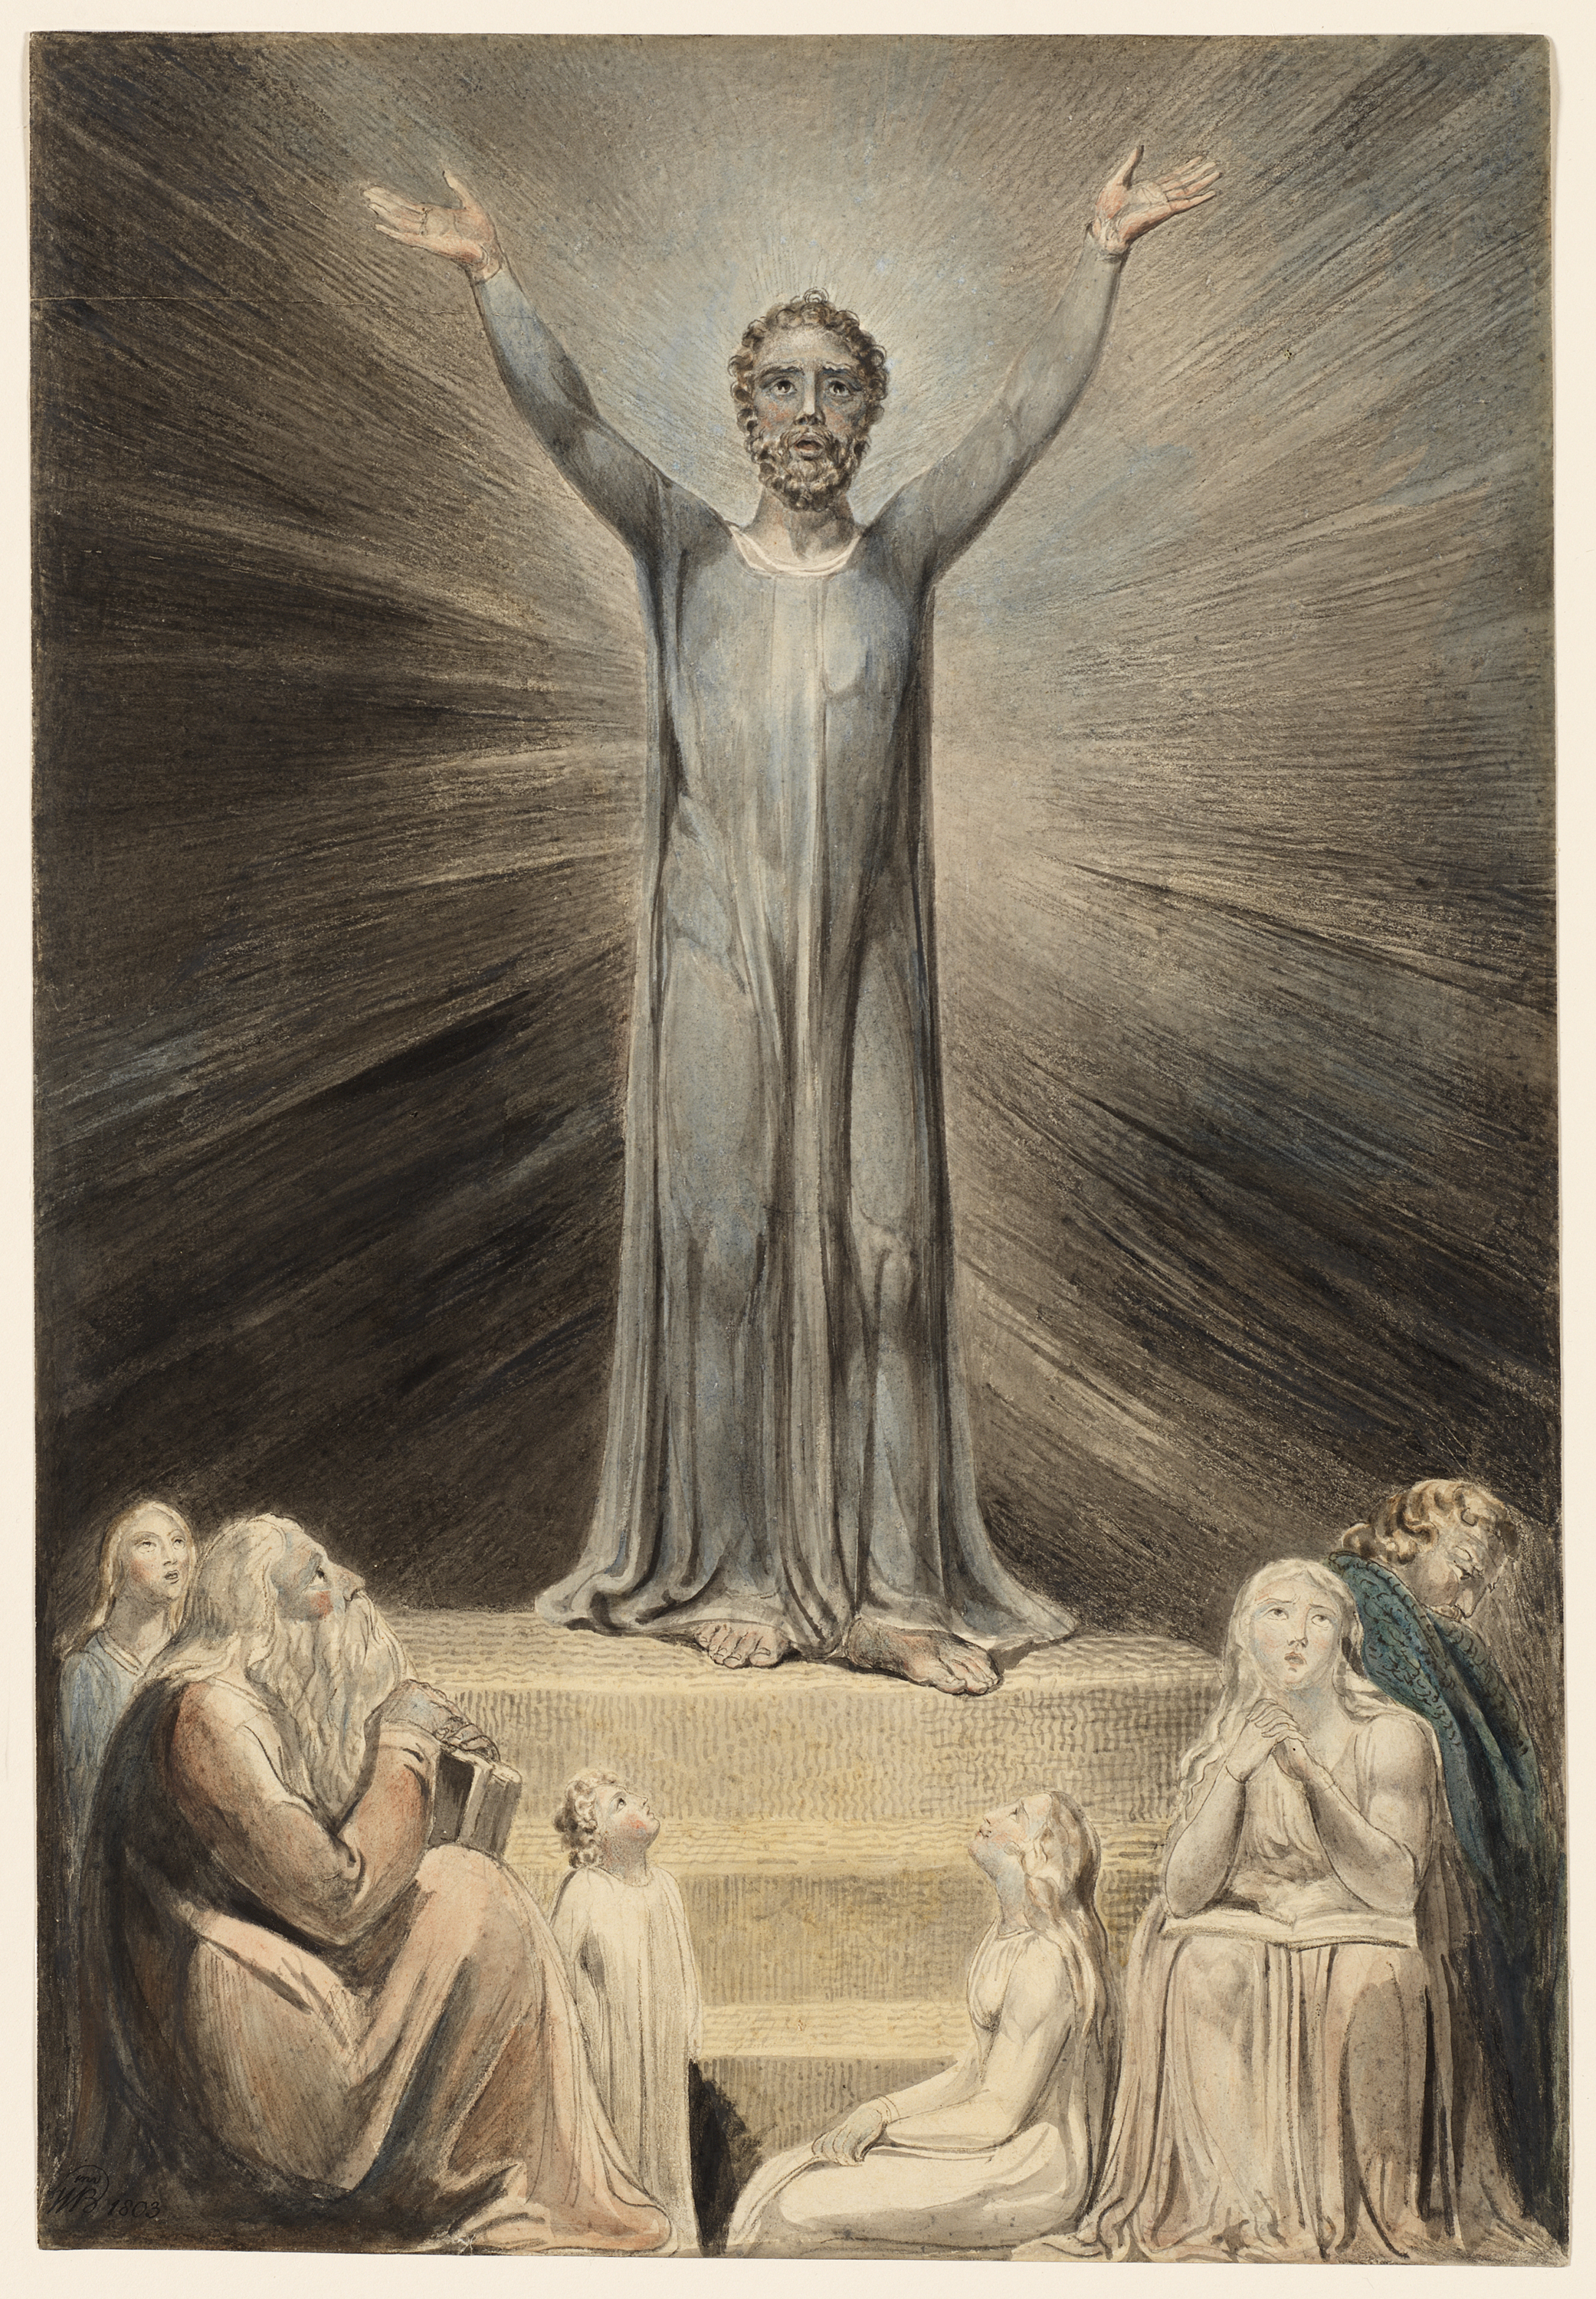 A muted painting of Saint Paul standing on an altar with his arms extended wide open in a moment of exaltation, dramatized by fine lines of black ink and watercolor.